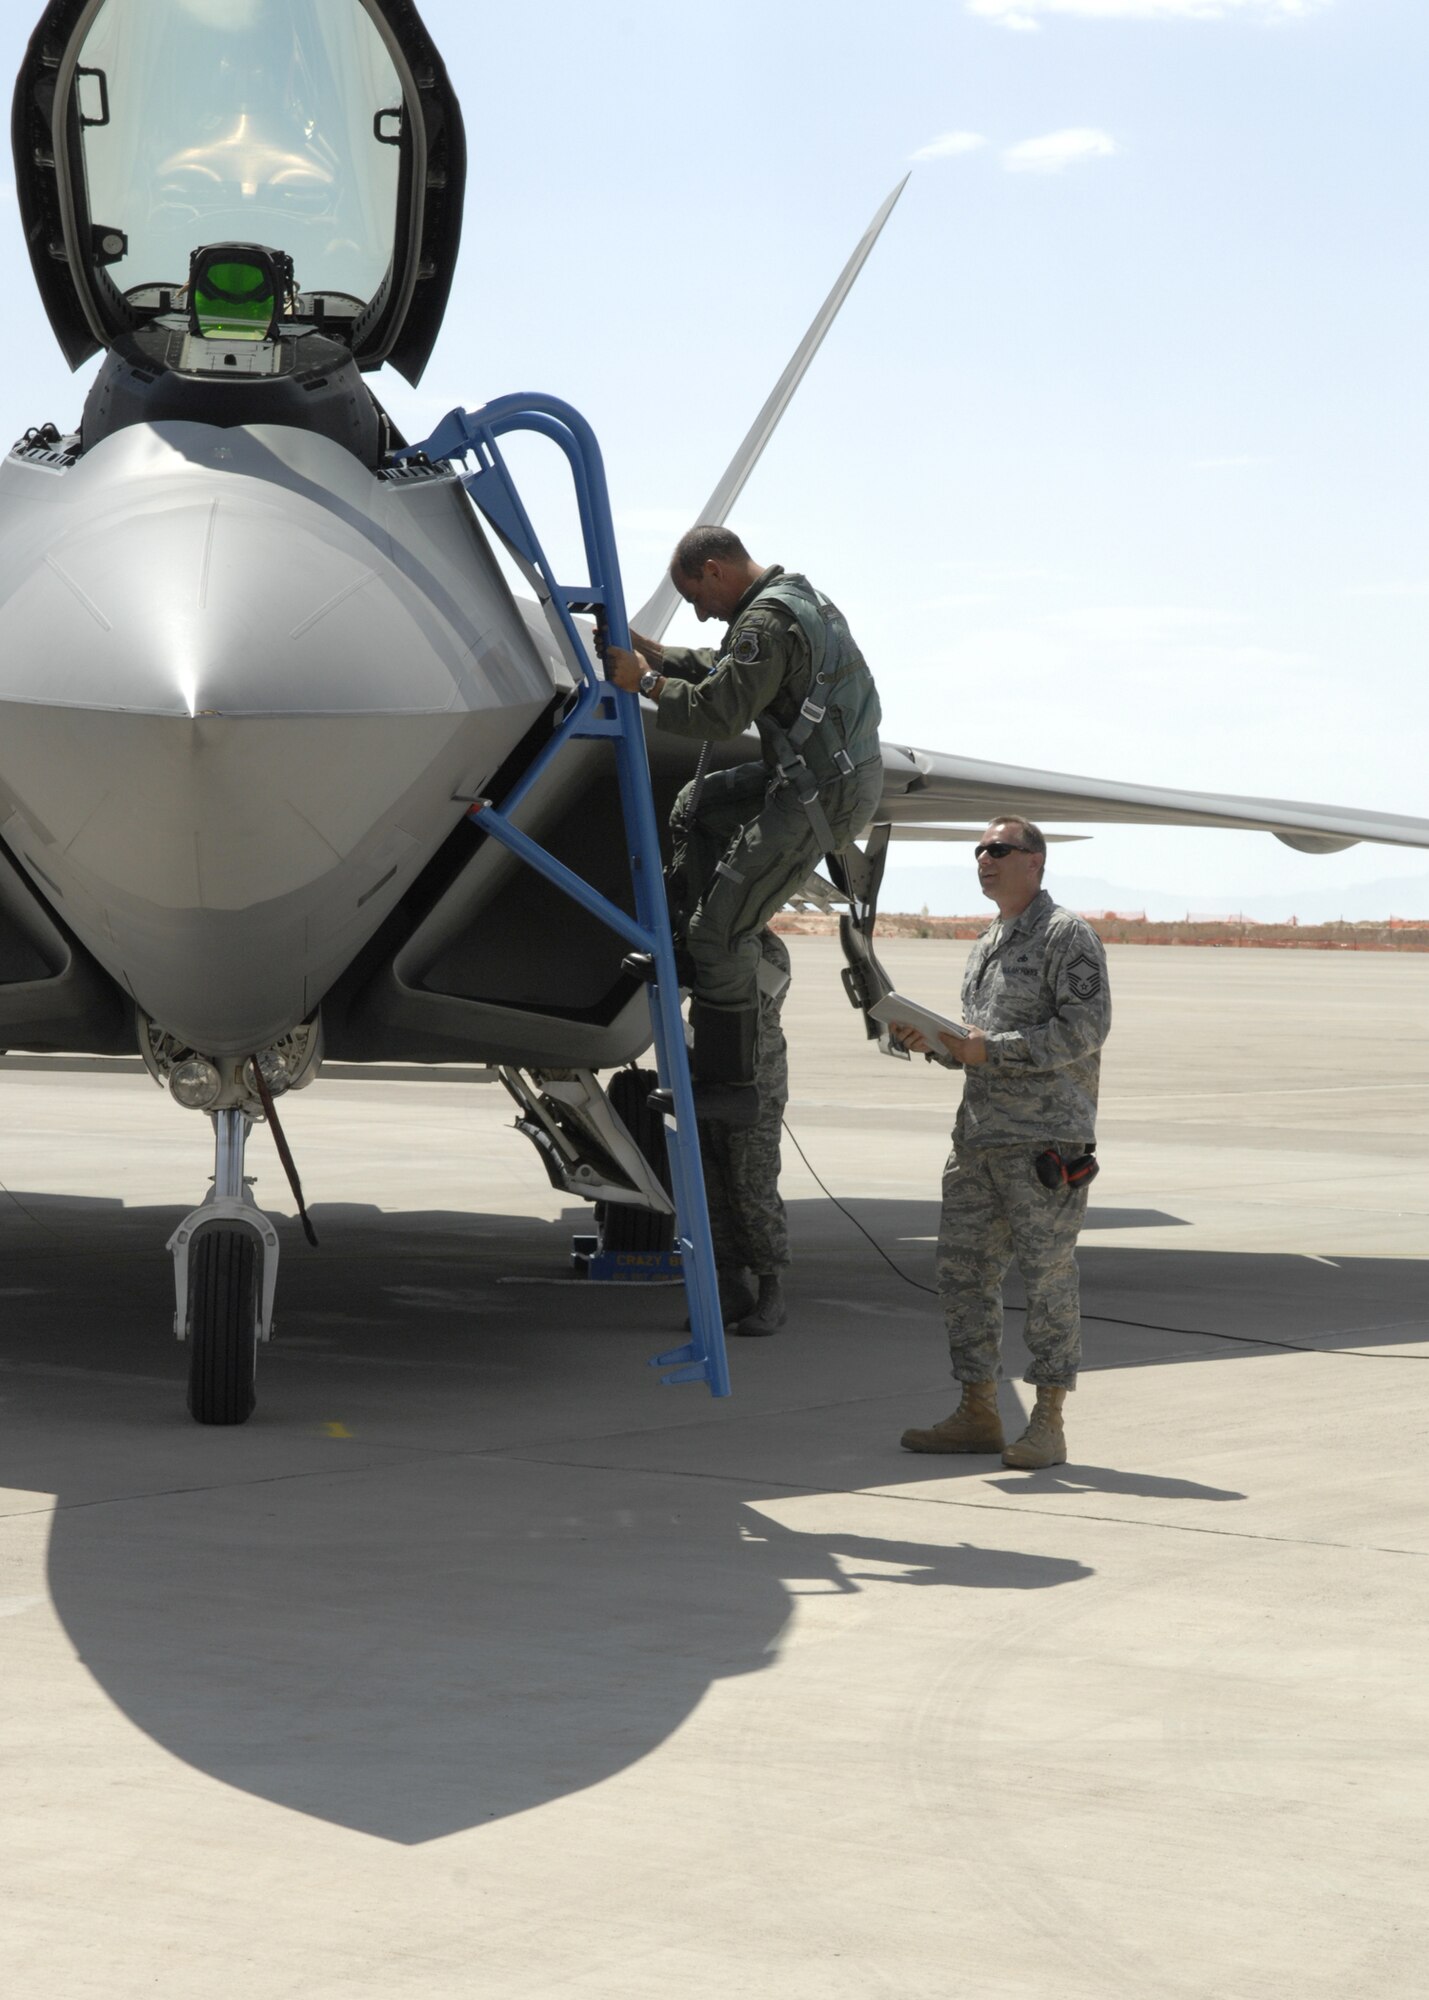 Col. Jeff Harrigian, 49th Fighter Wing commander, steps out of an F-22 Raptor on Holloman Air Force Base, N.M., June 2.This is one of the first F-22s assigned to Holloman. (U.S. Air Force photo/Airman 1st Class Rachel A. Kocin)